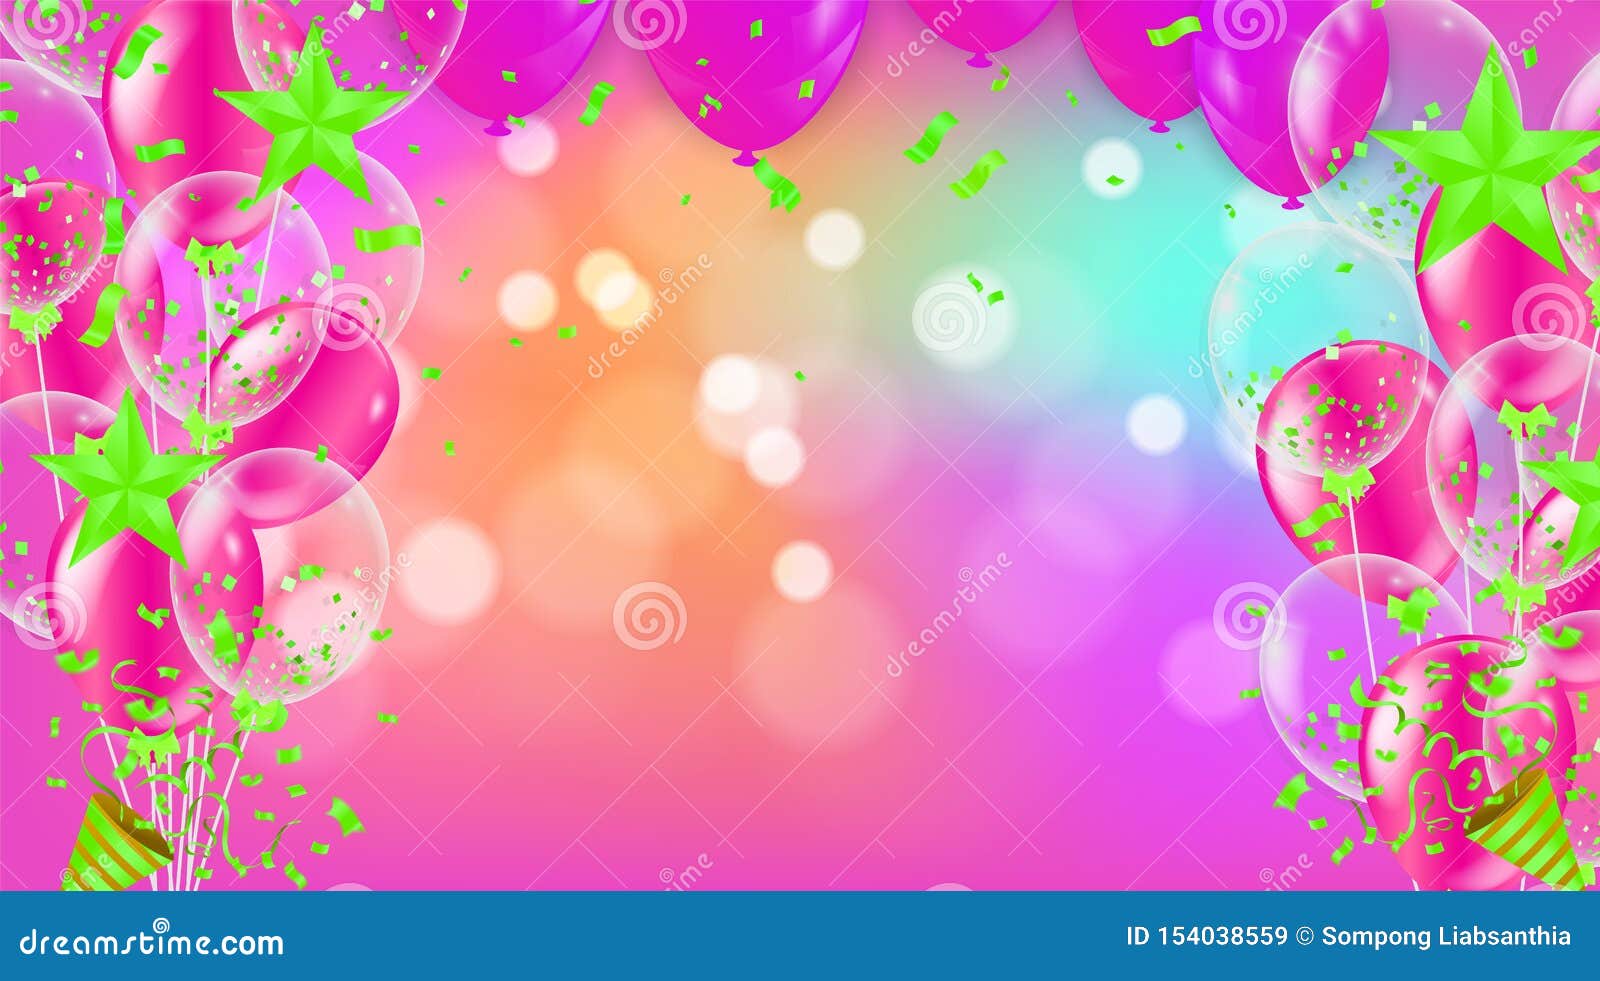 Happy Birthday Backgrounds Grand Opening Ceremony Vector Banner. Realistic  Glossy Balloons, Confetti Stock Vector - Illustration of fair, funny:  154038559